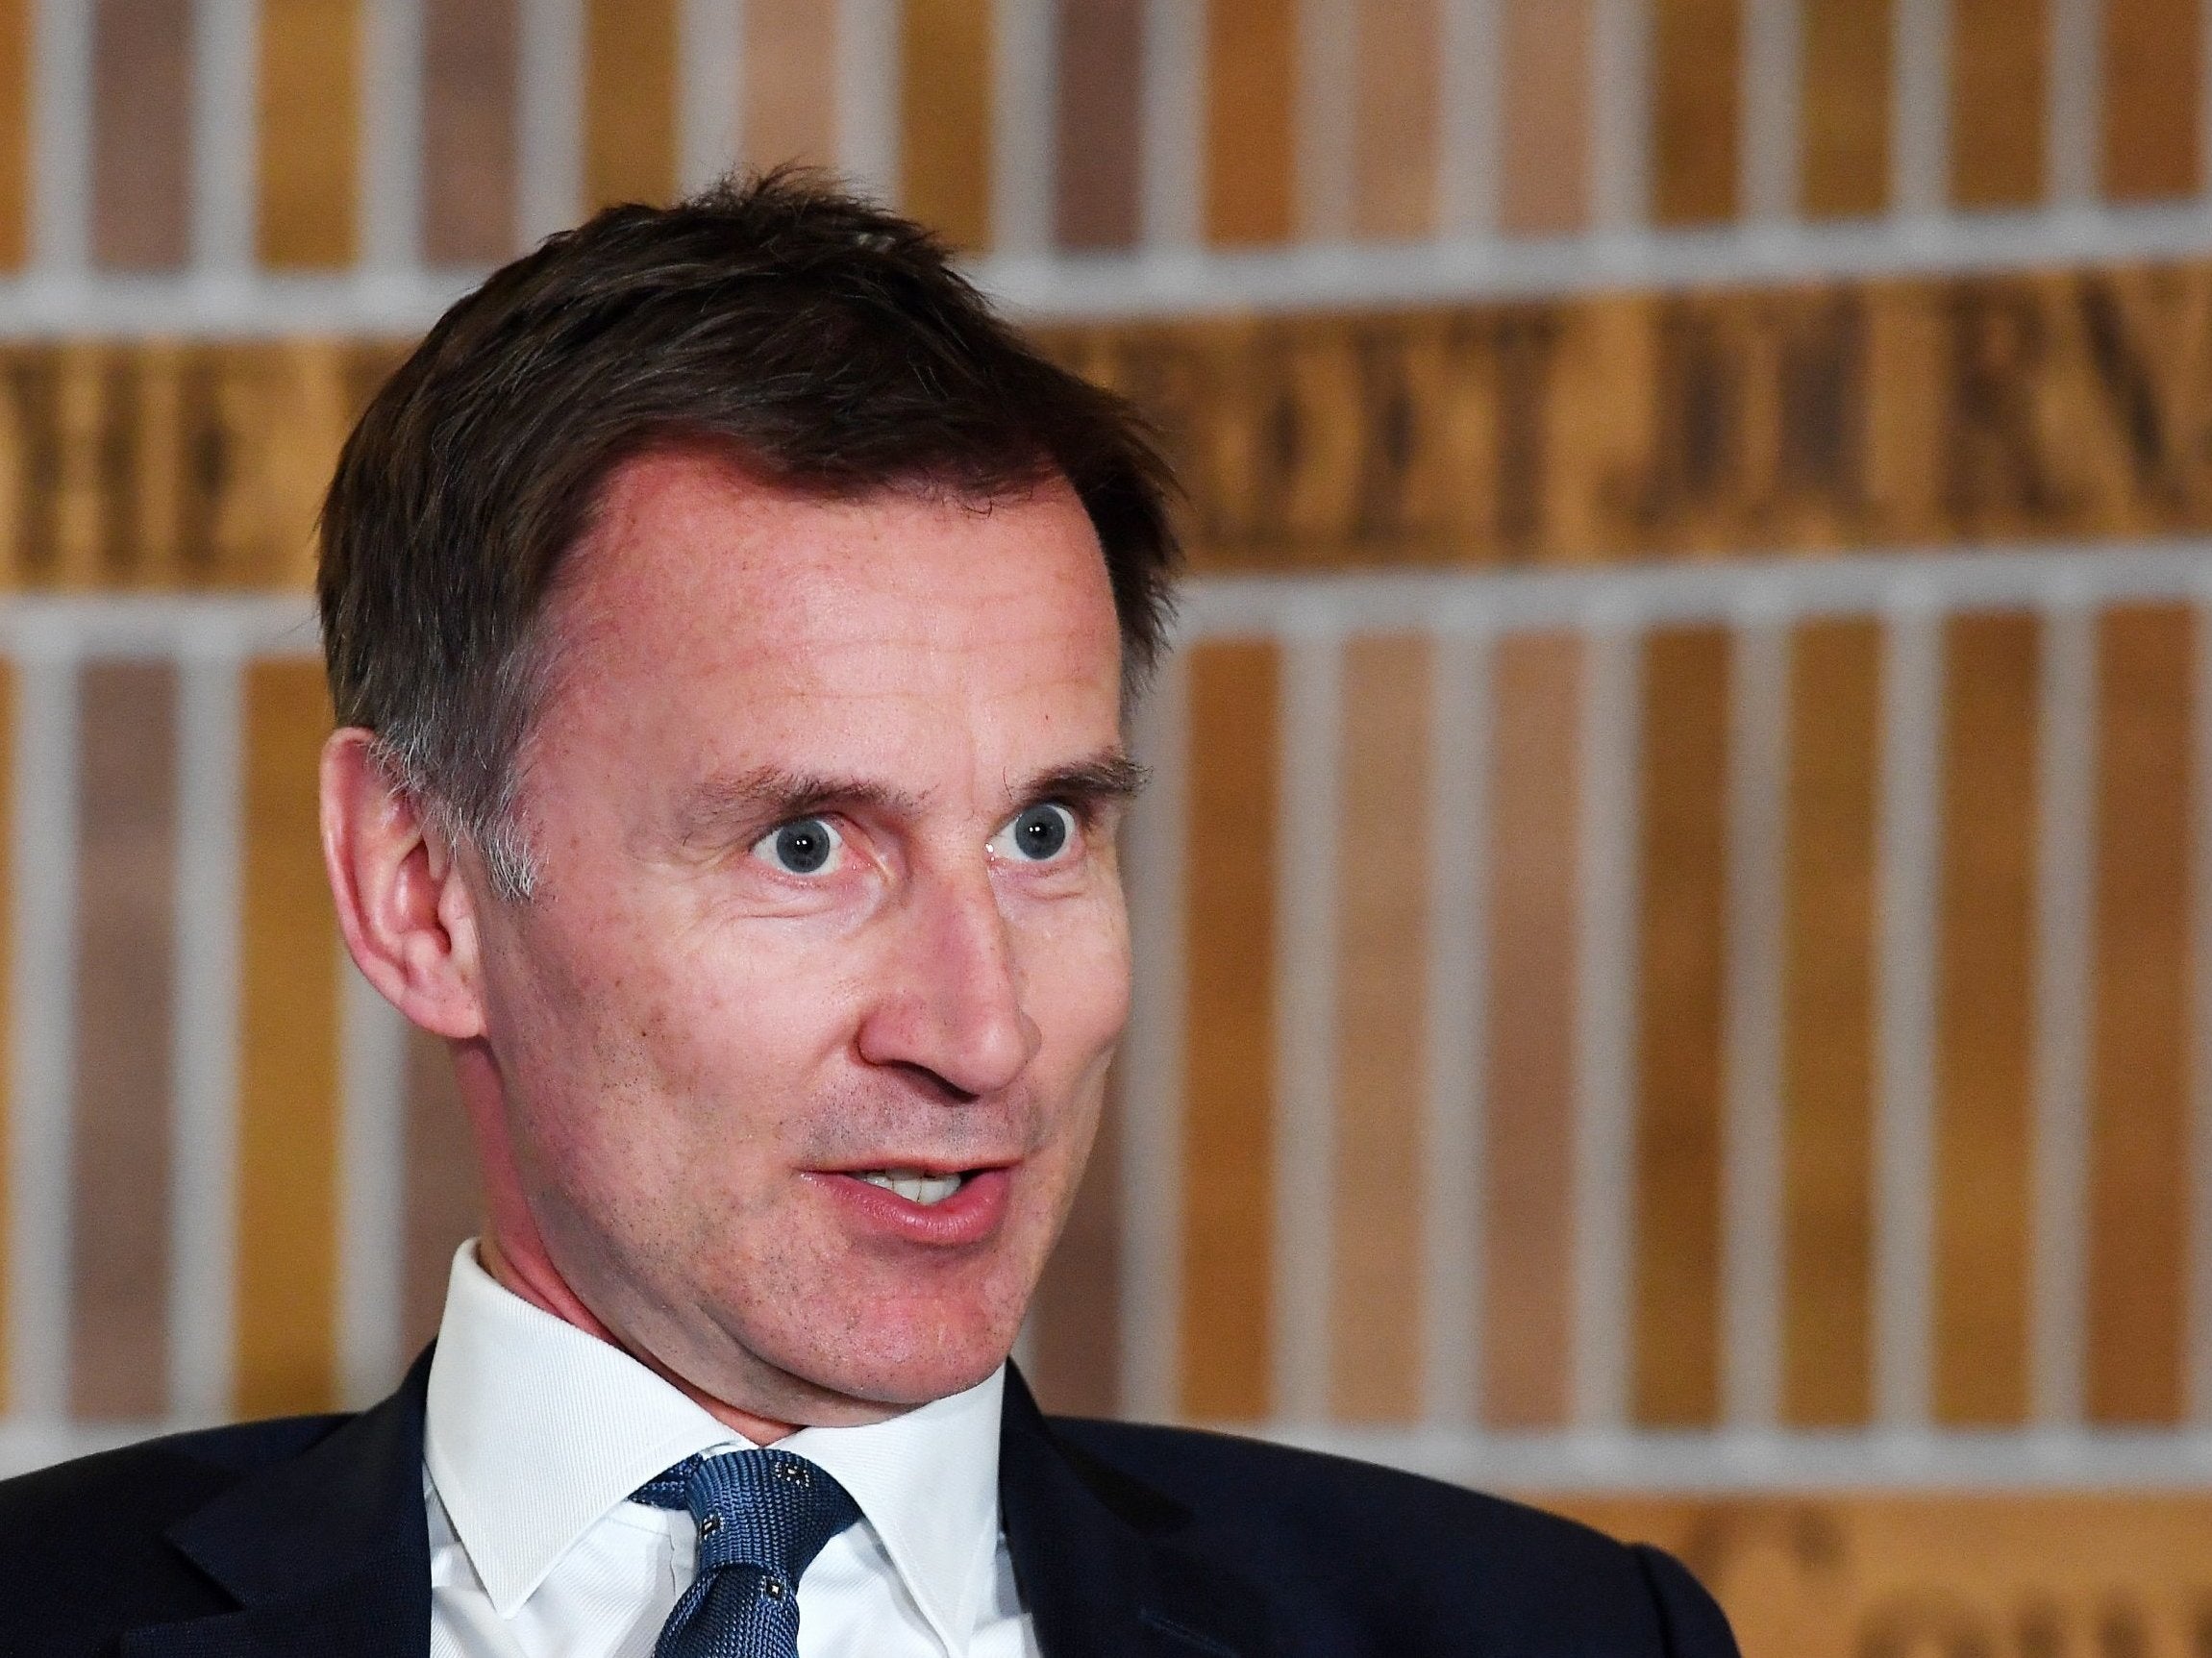 Jeremy Hunt appears to struggle for an answer when asked why people should vote Tory